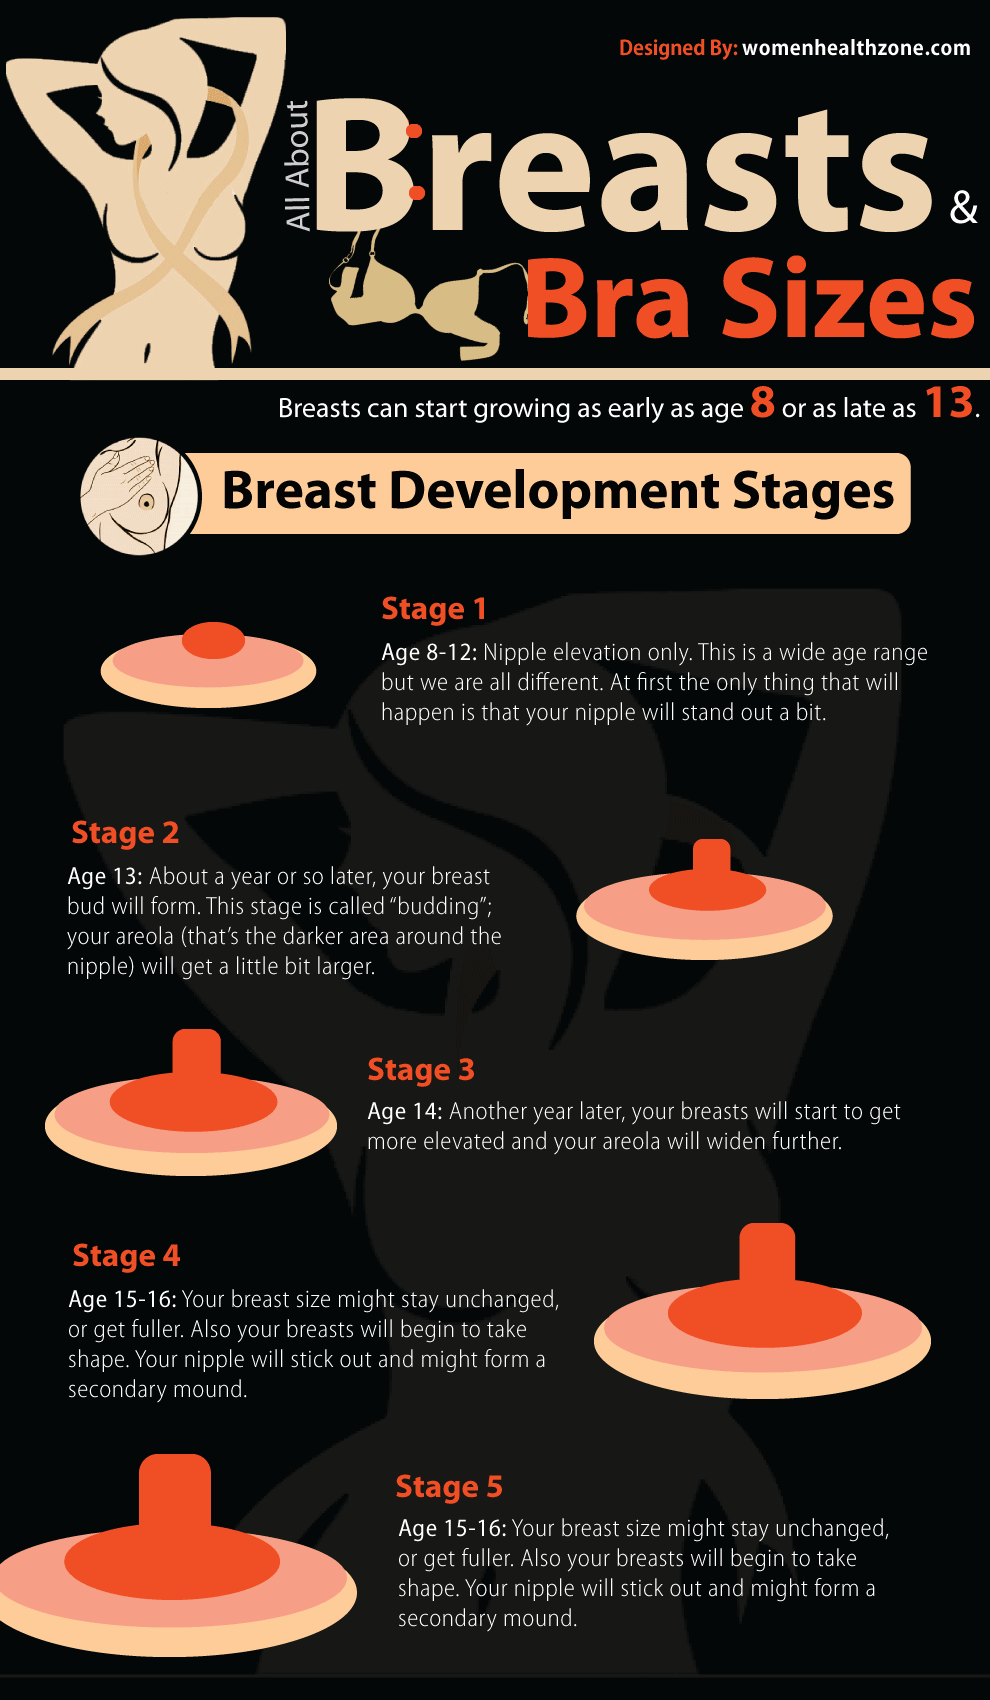 All About Breast and Bra Sizes